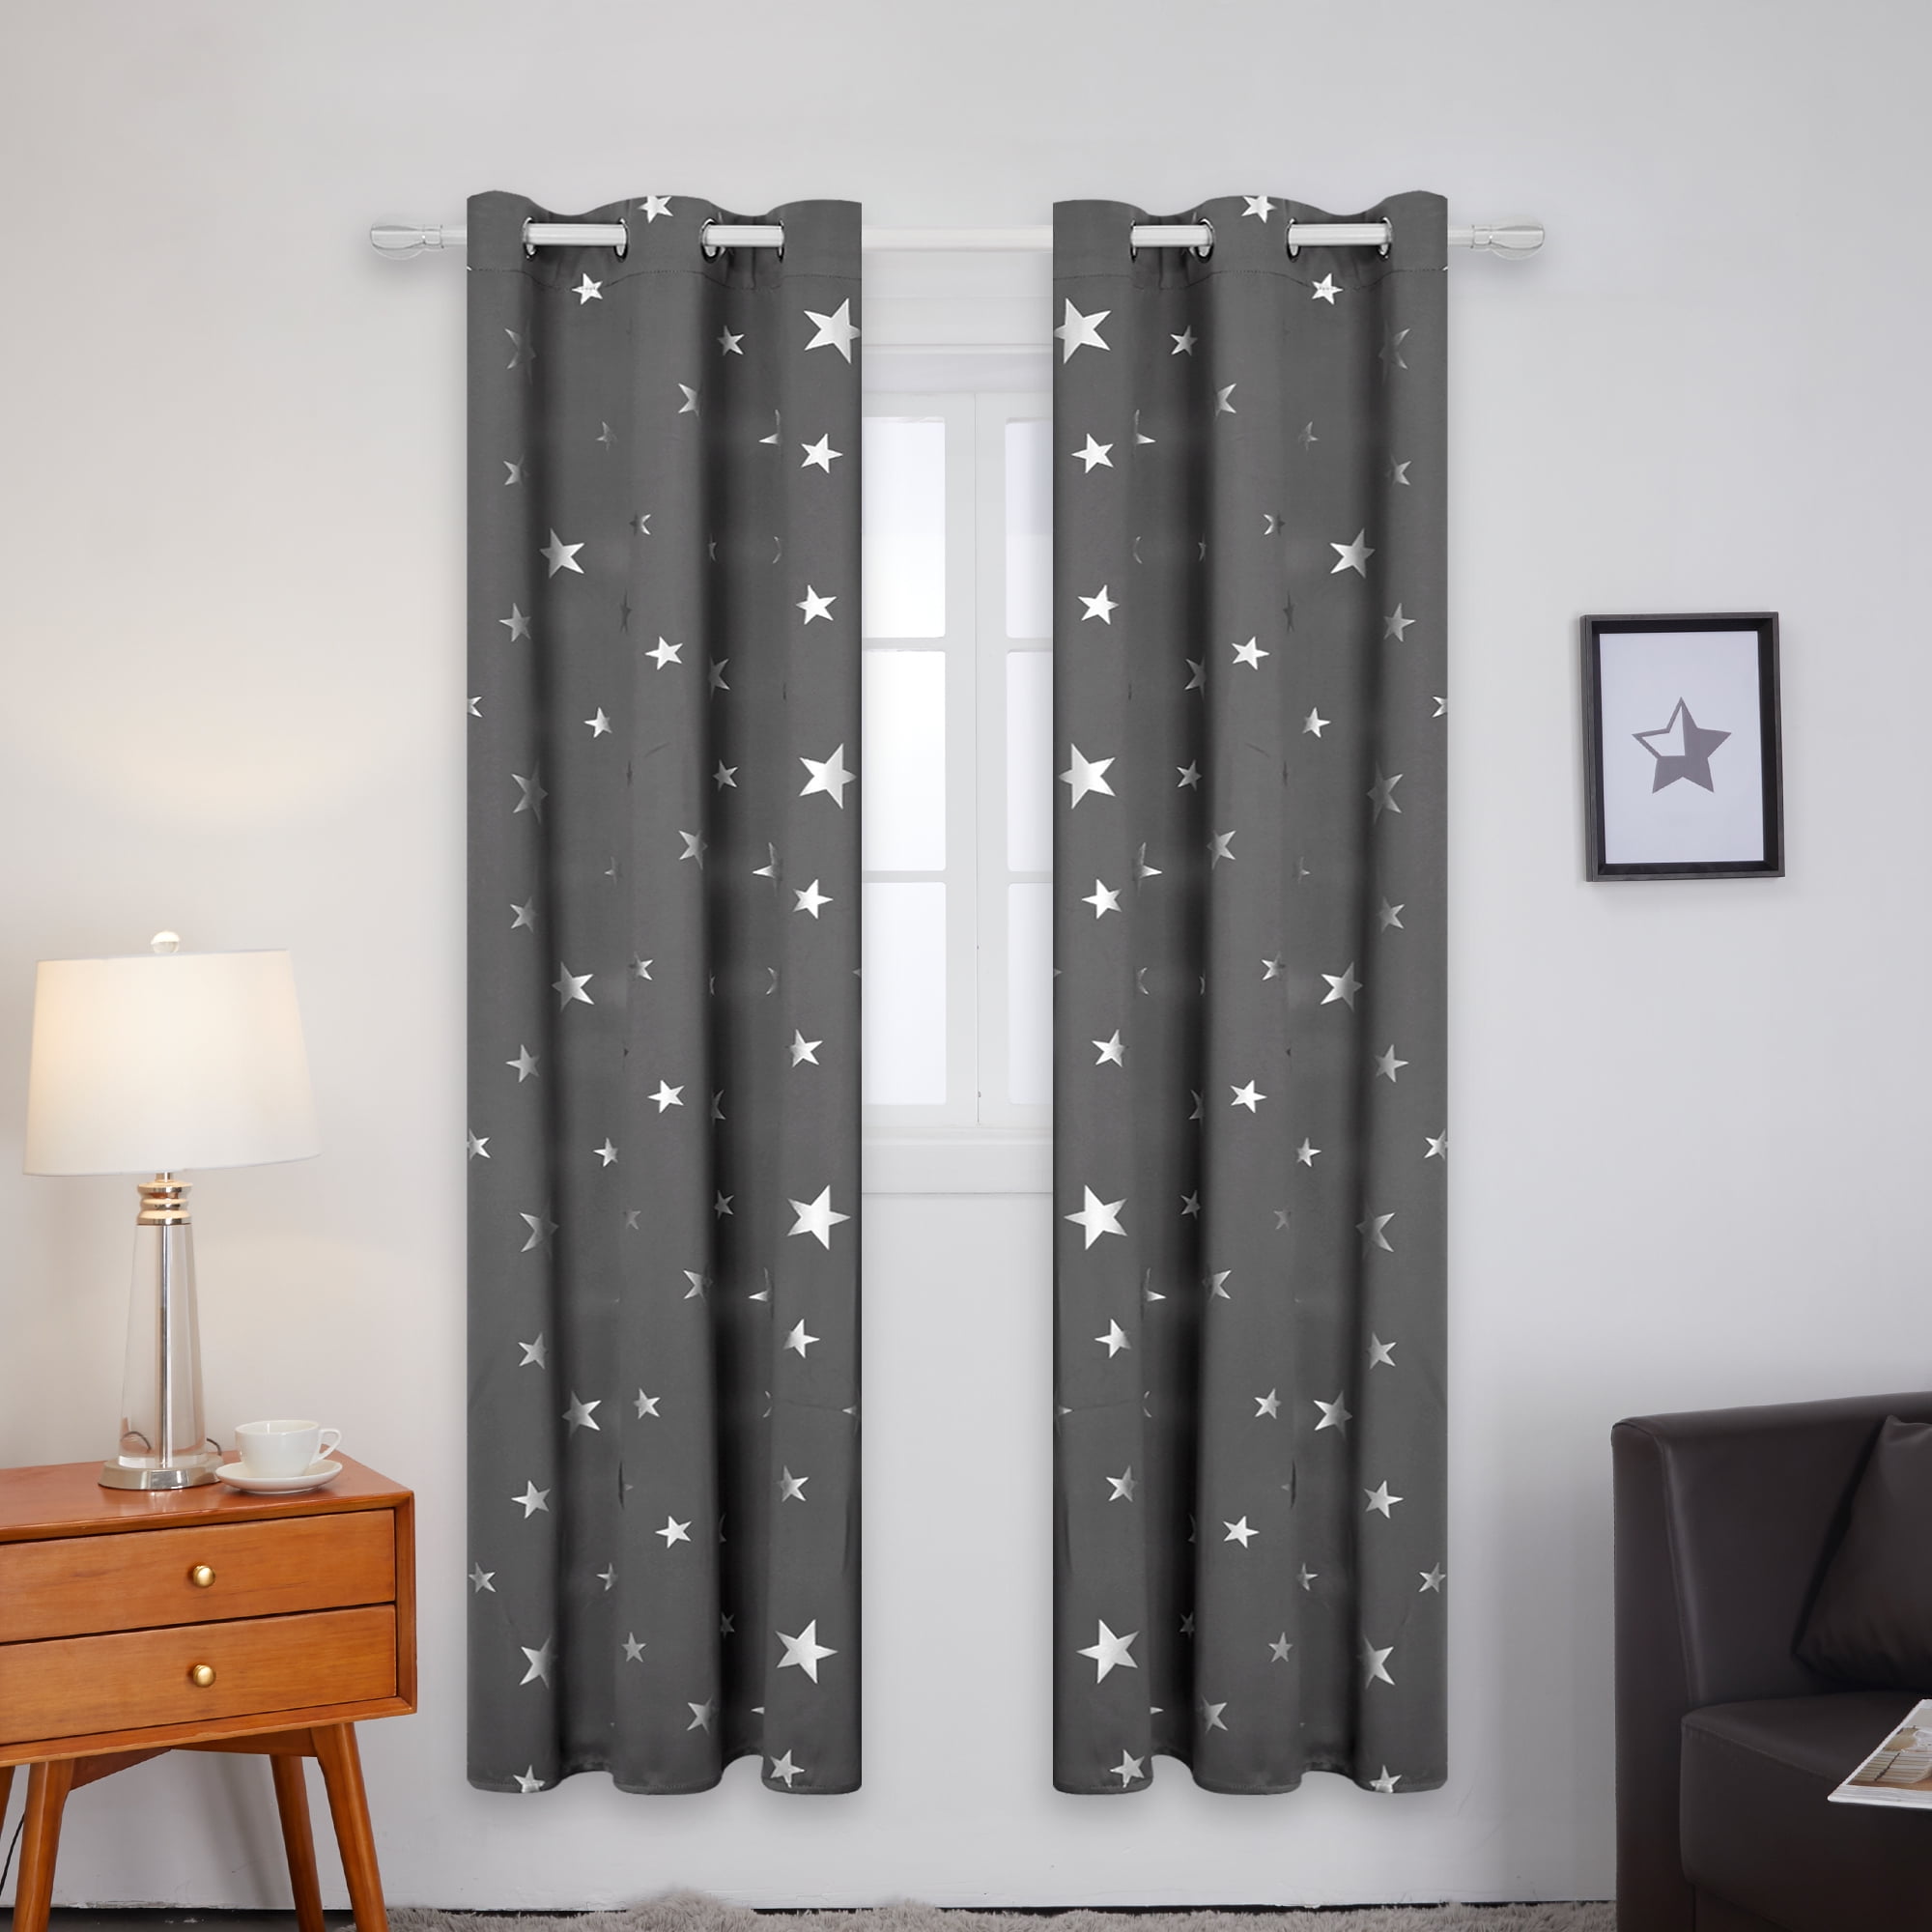 2PC Blackout Window Curtain Star Moon Pattern Thermal Insulated Drapes Bedroom 